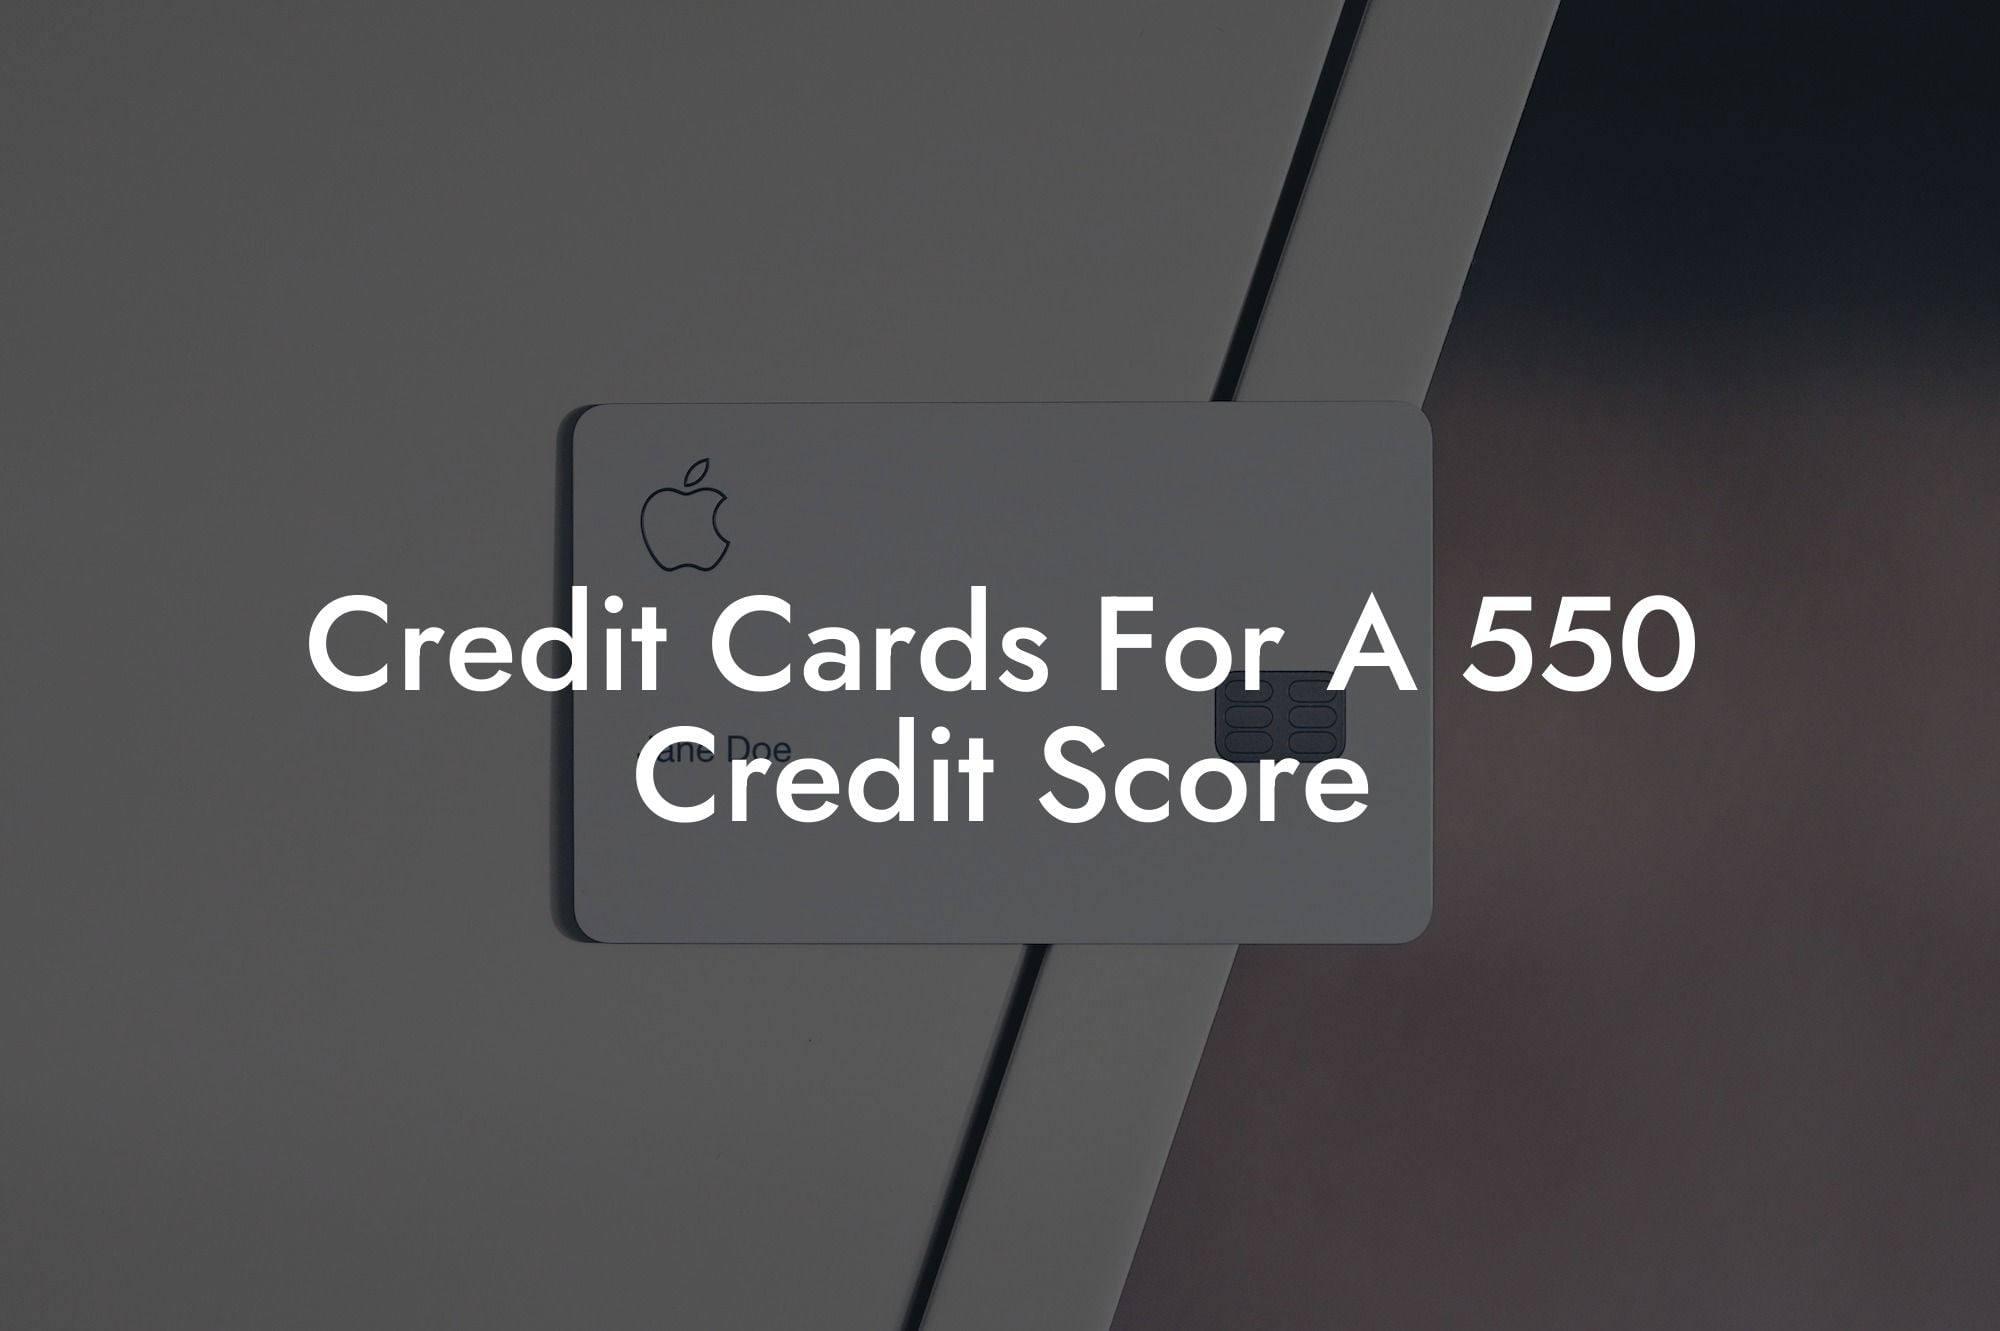 Credit Cards For A 550 Credit Score